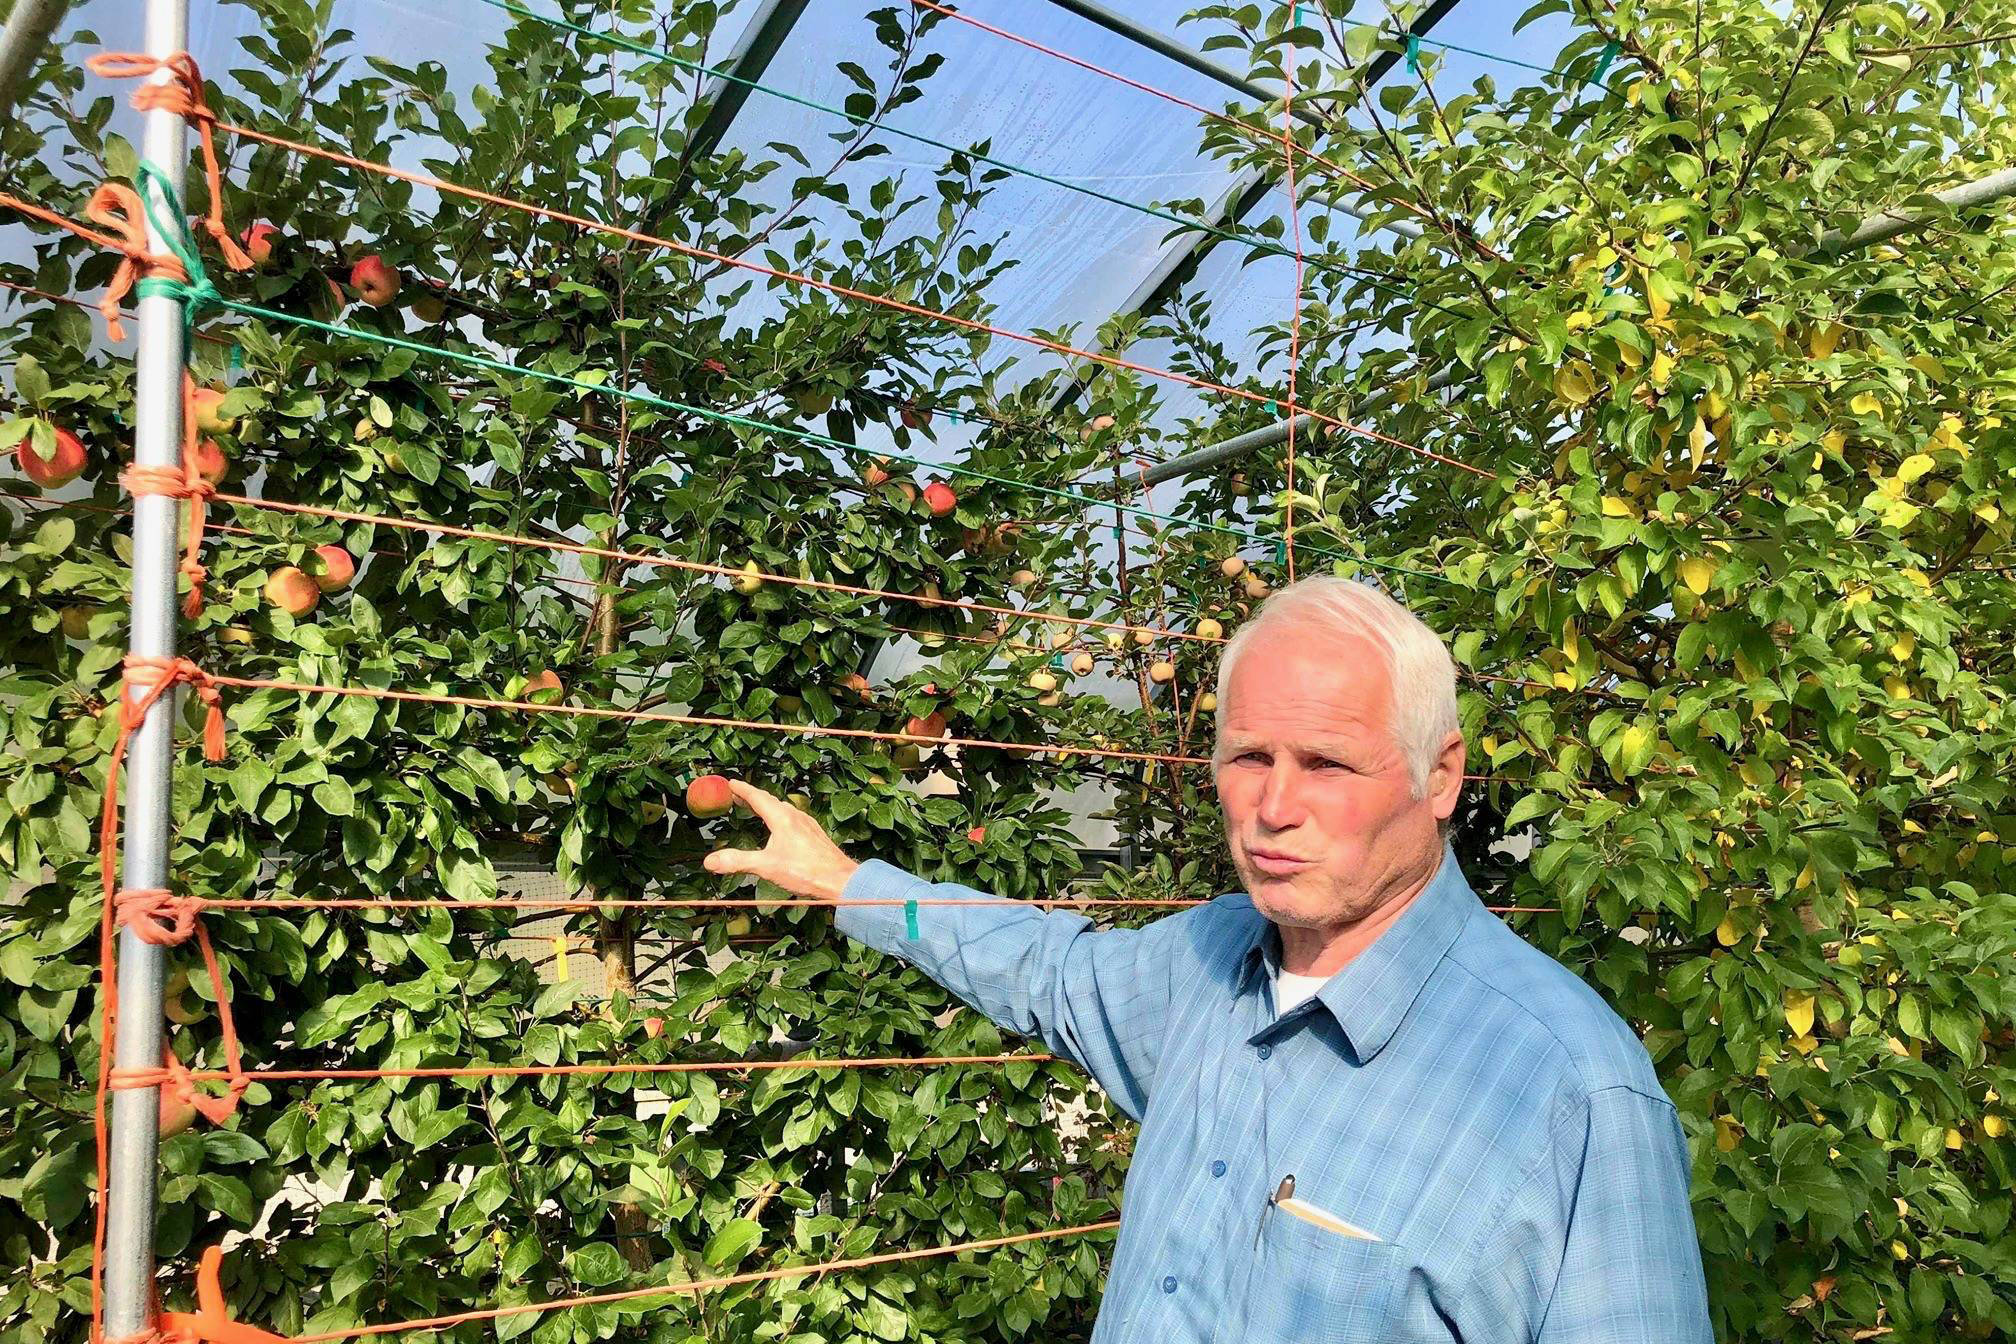 Michael O’Brien, owner of O’Brien Gardens and Trees, on his farm on Tuesday, Sept. 4, 2018, in Nikiski, Alaska. (Photo by Victoria Petersen/Peninsula Clarion)